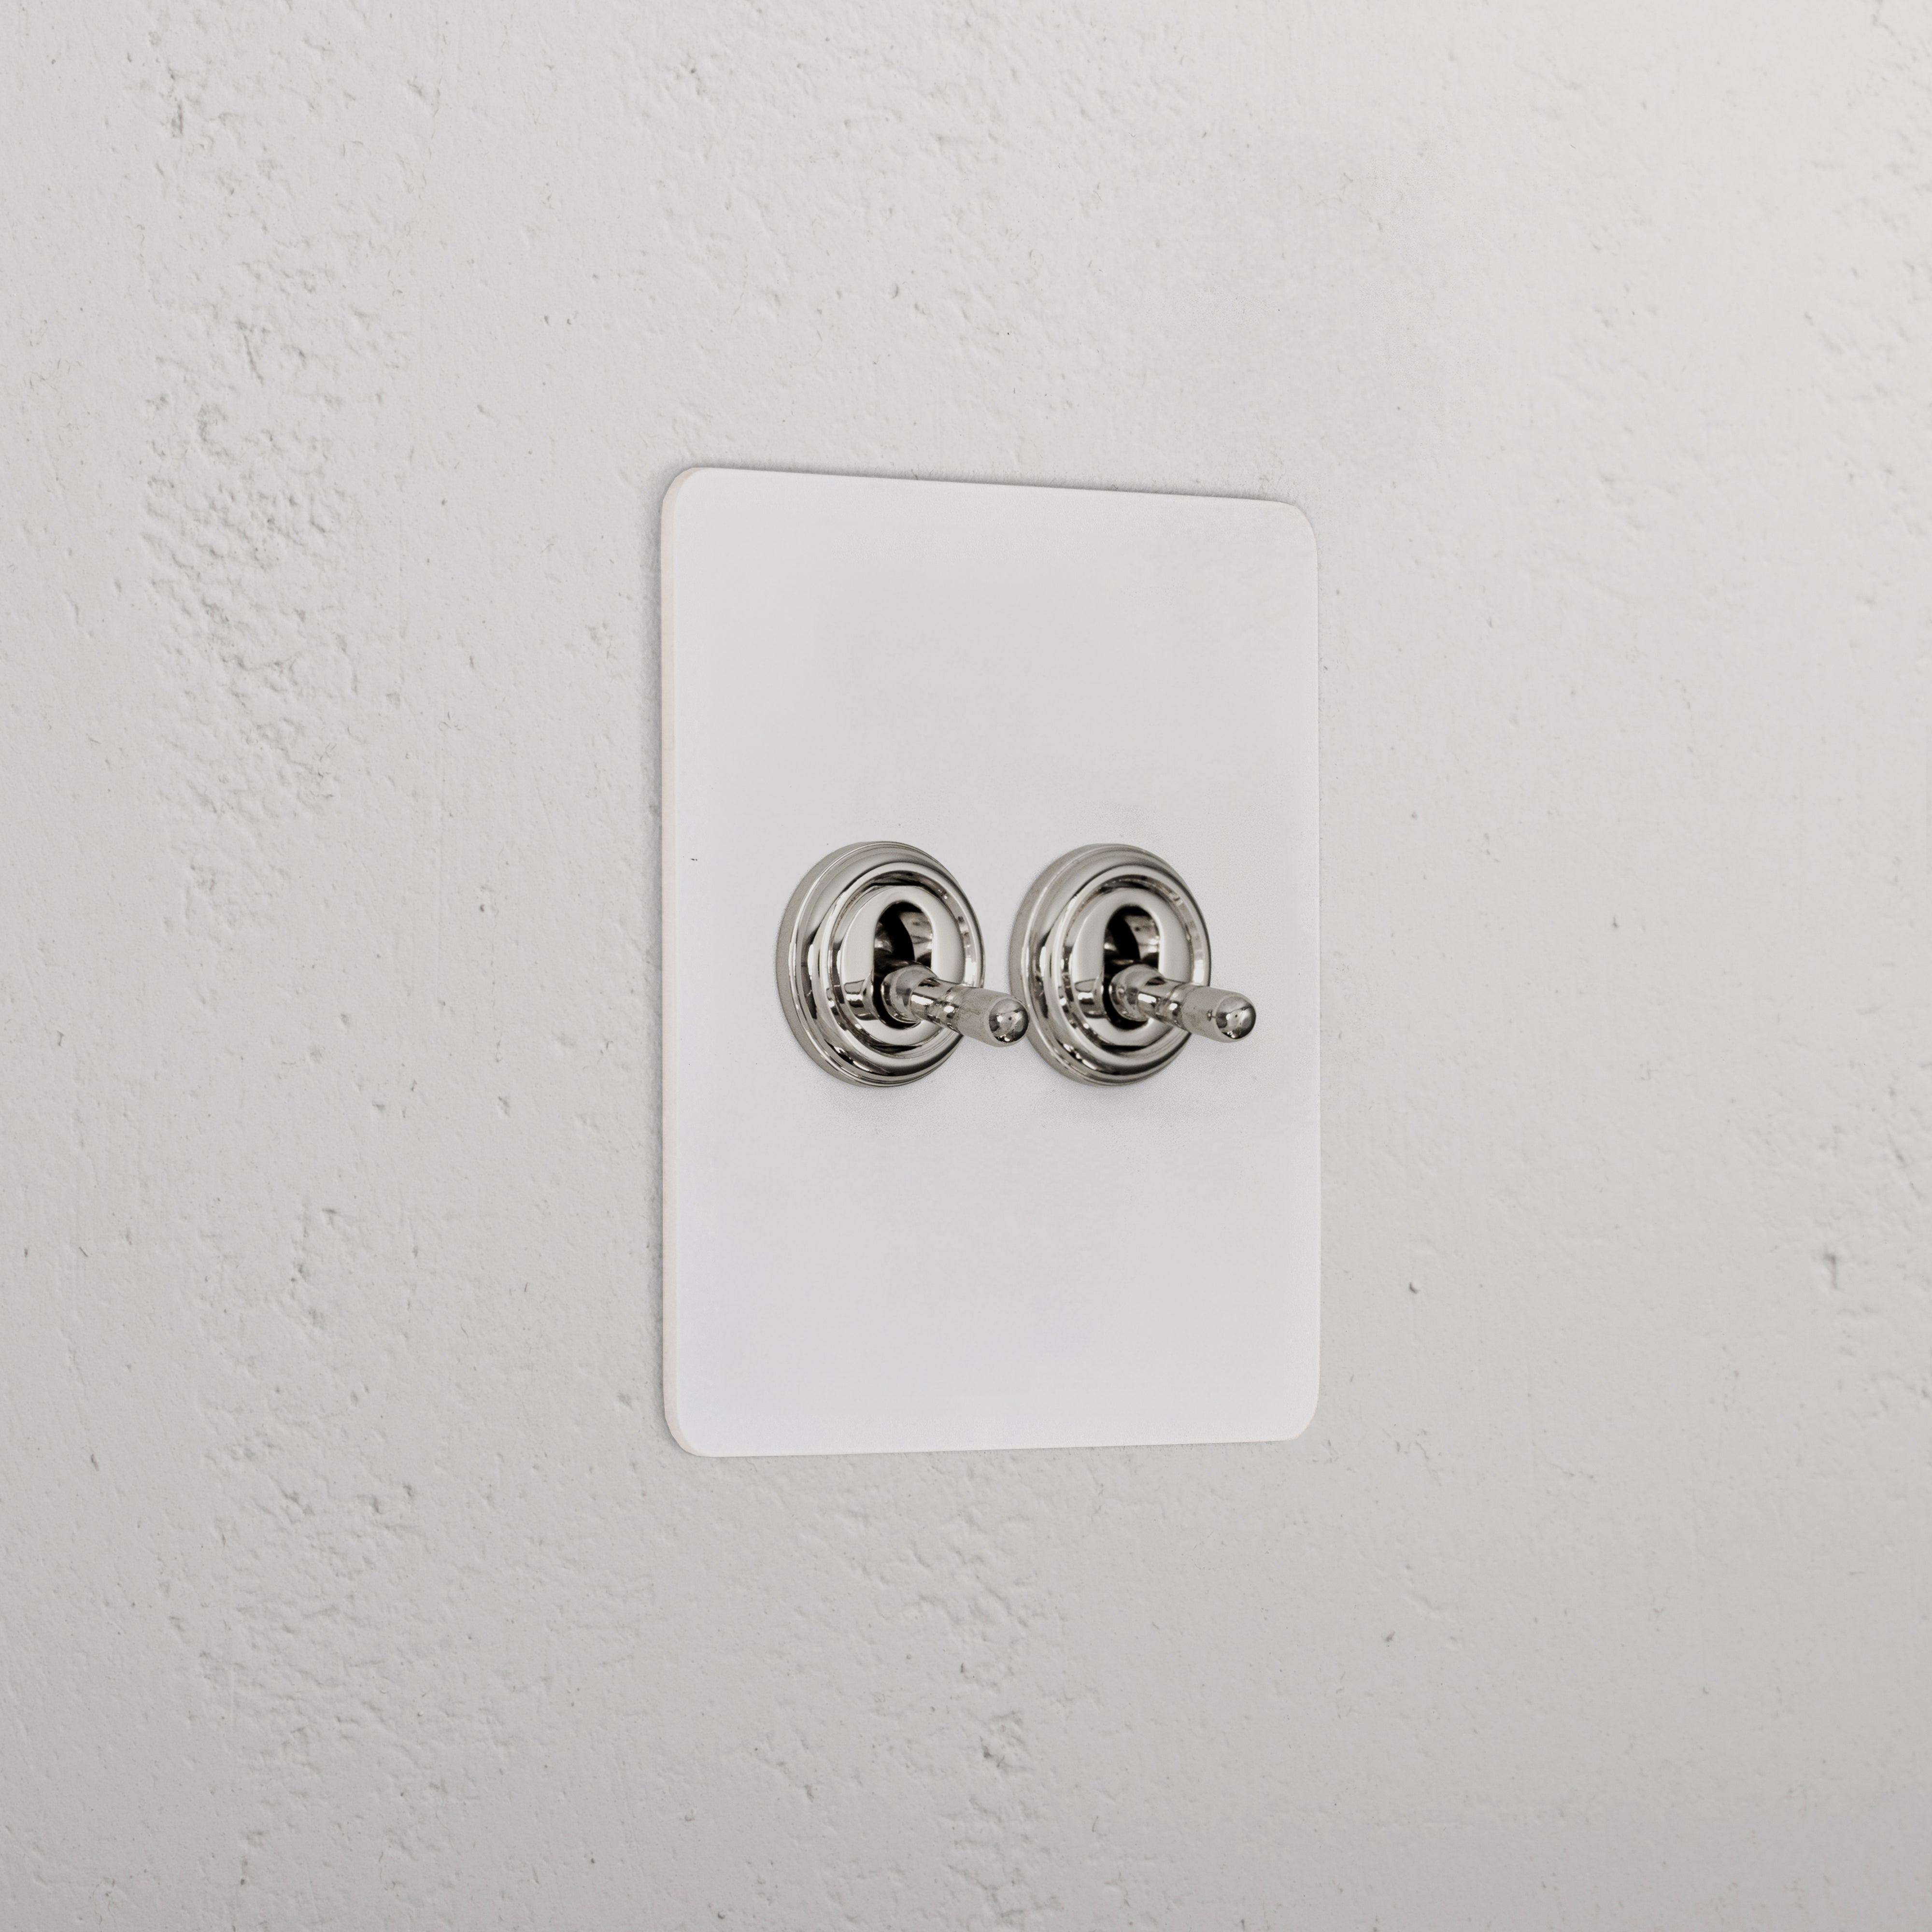 2G Two Way Toggle Slimline Switch - Paintable Polished Nickel